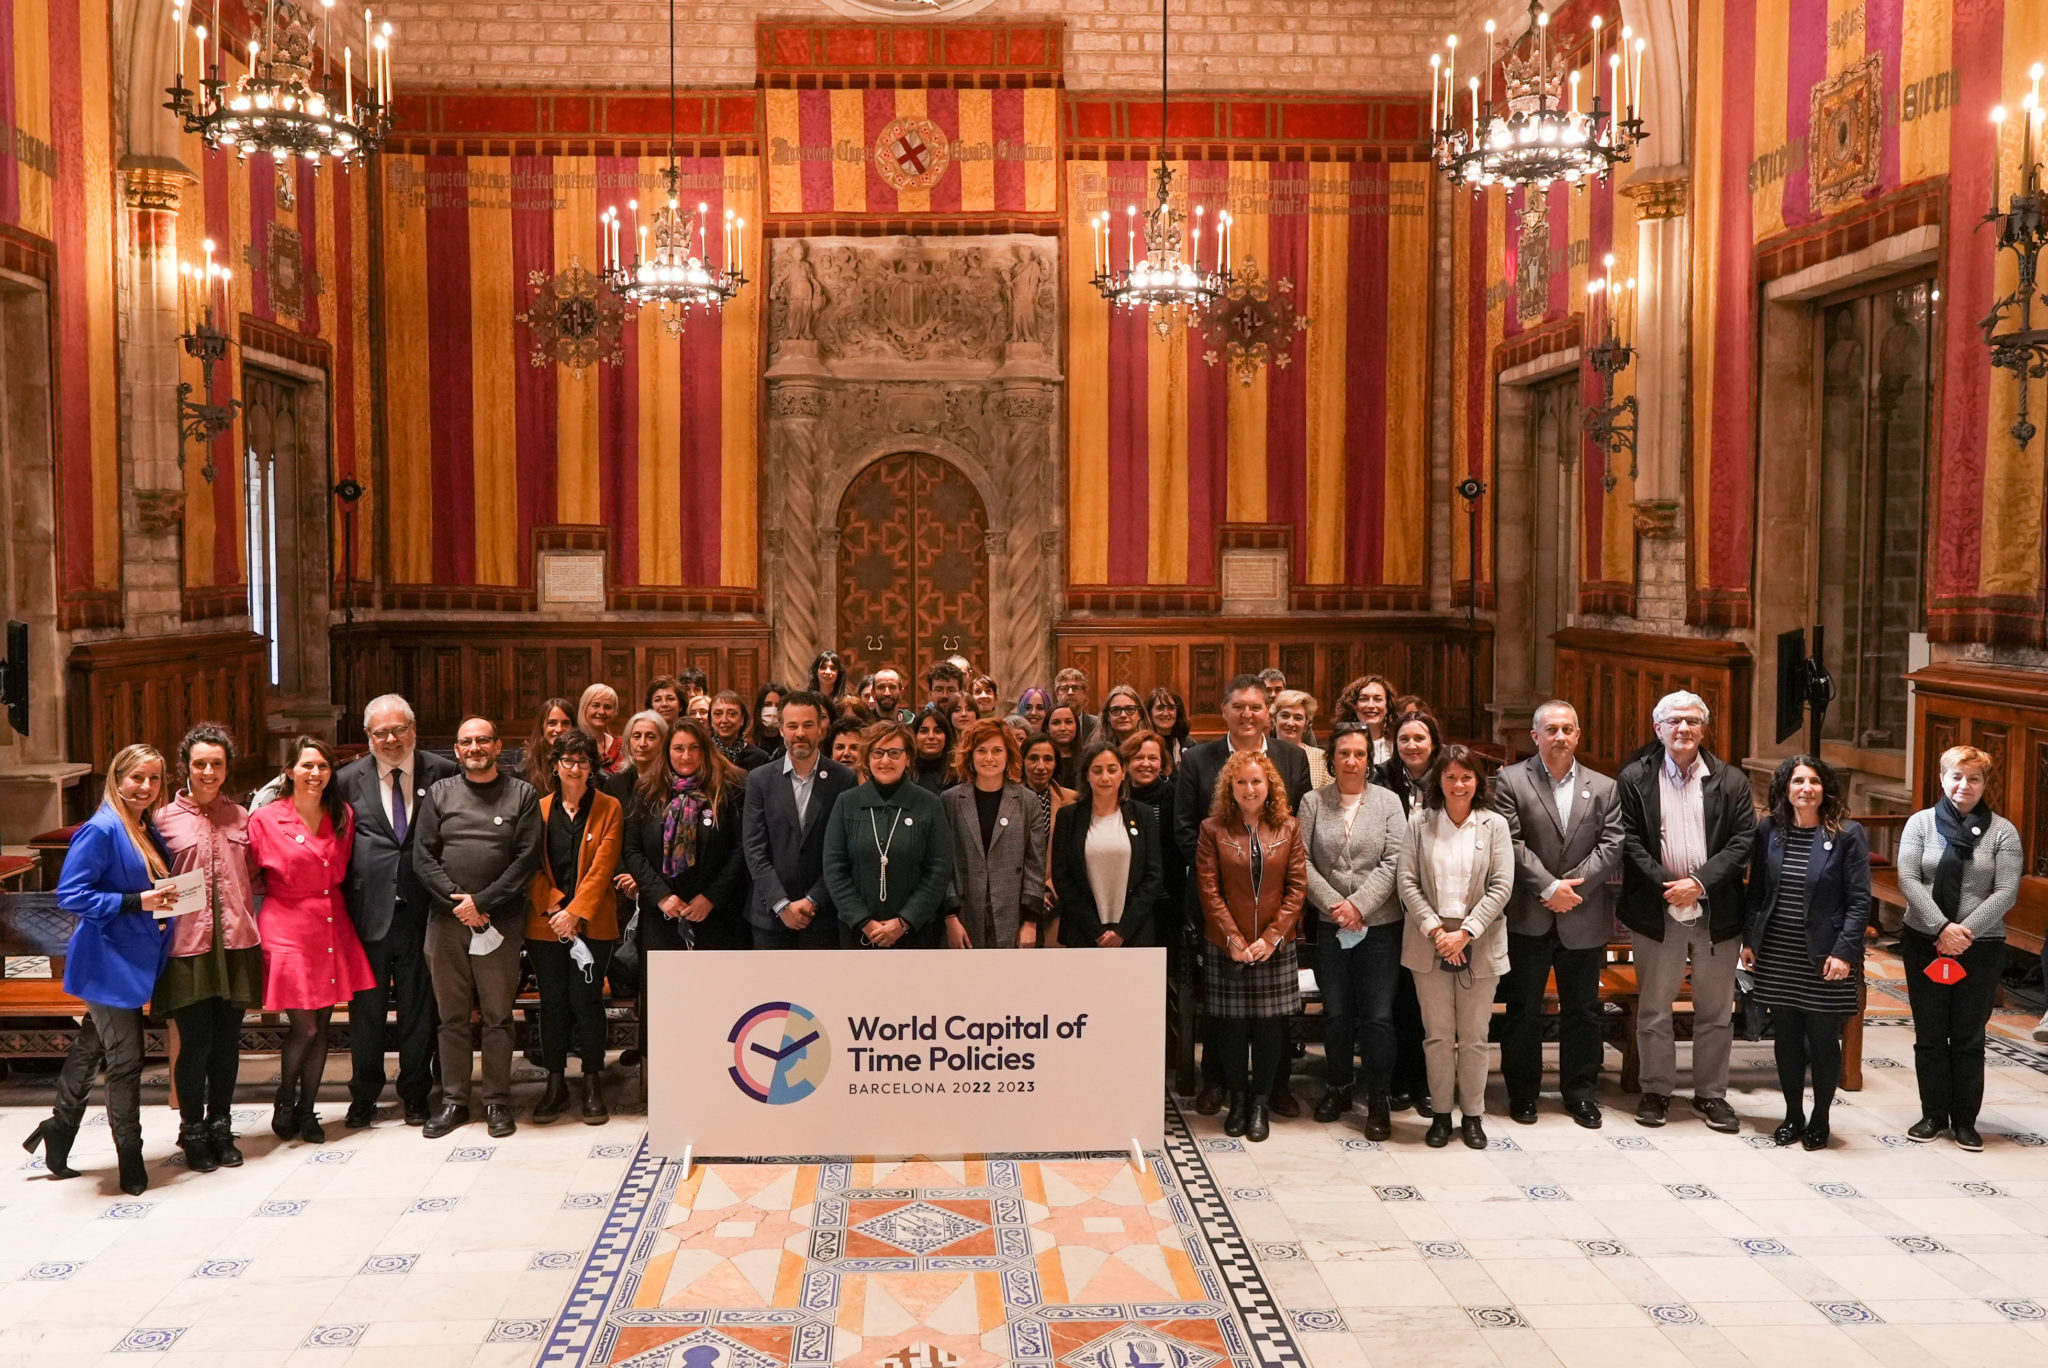 Family photo of the presentation ceremony of the World Capital of Time Policies